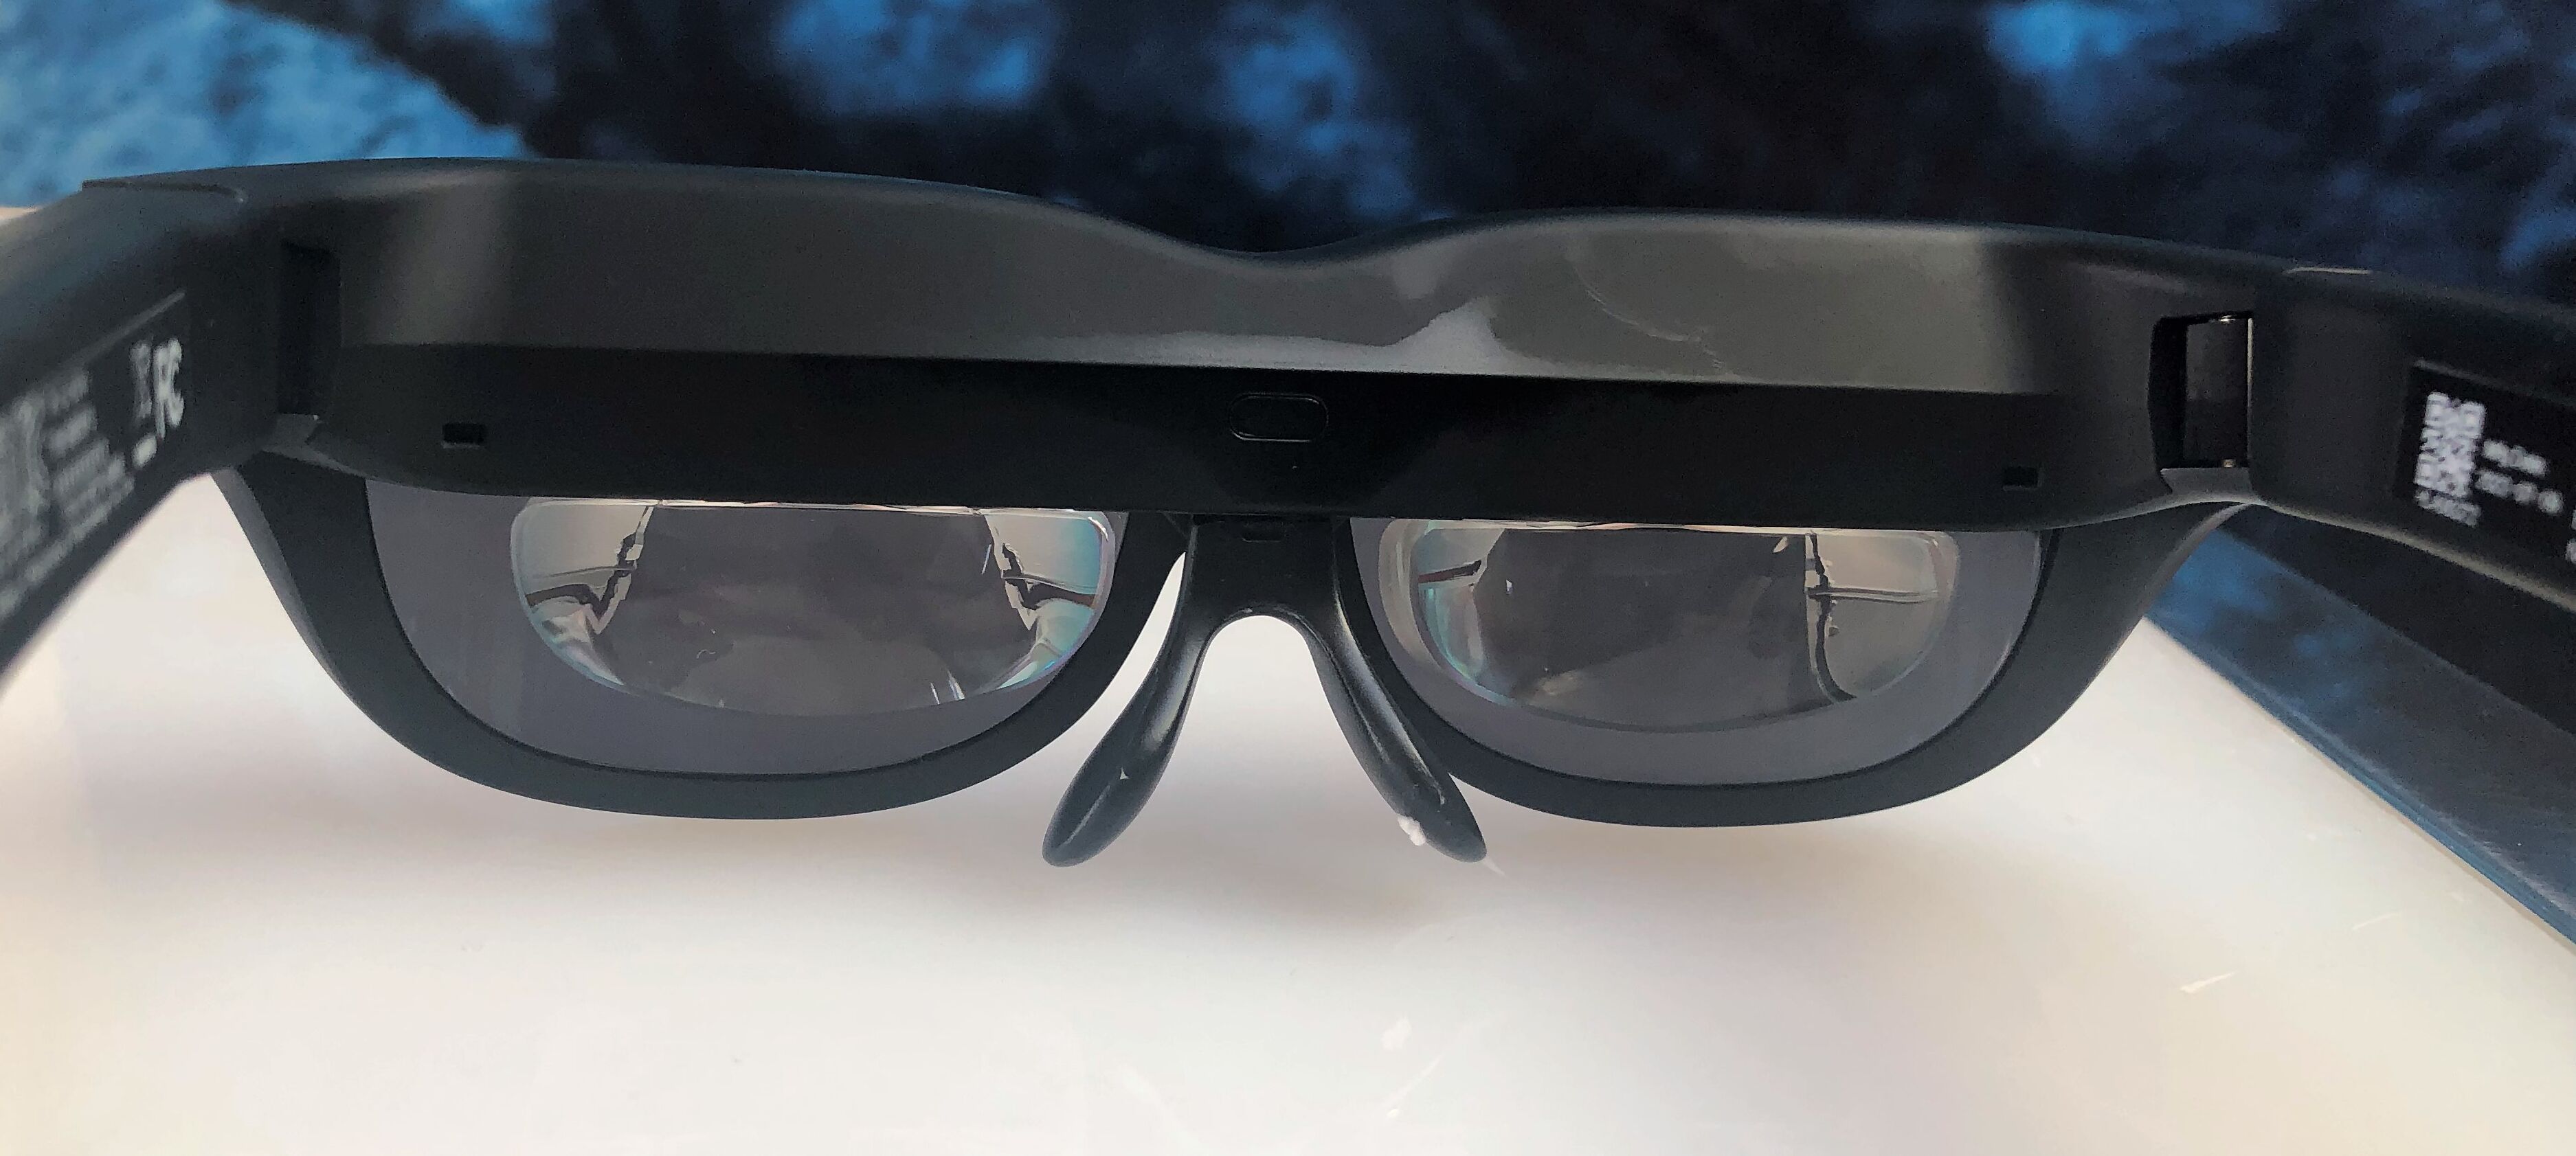 Lenovo announces consumer AR glasses that can tether to iPhones | Ars  Technica